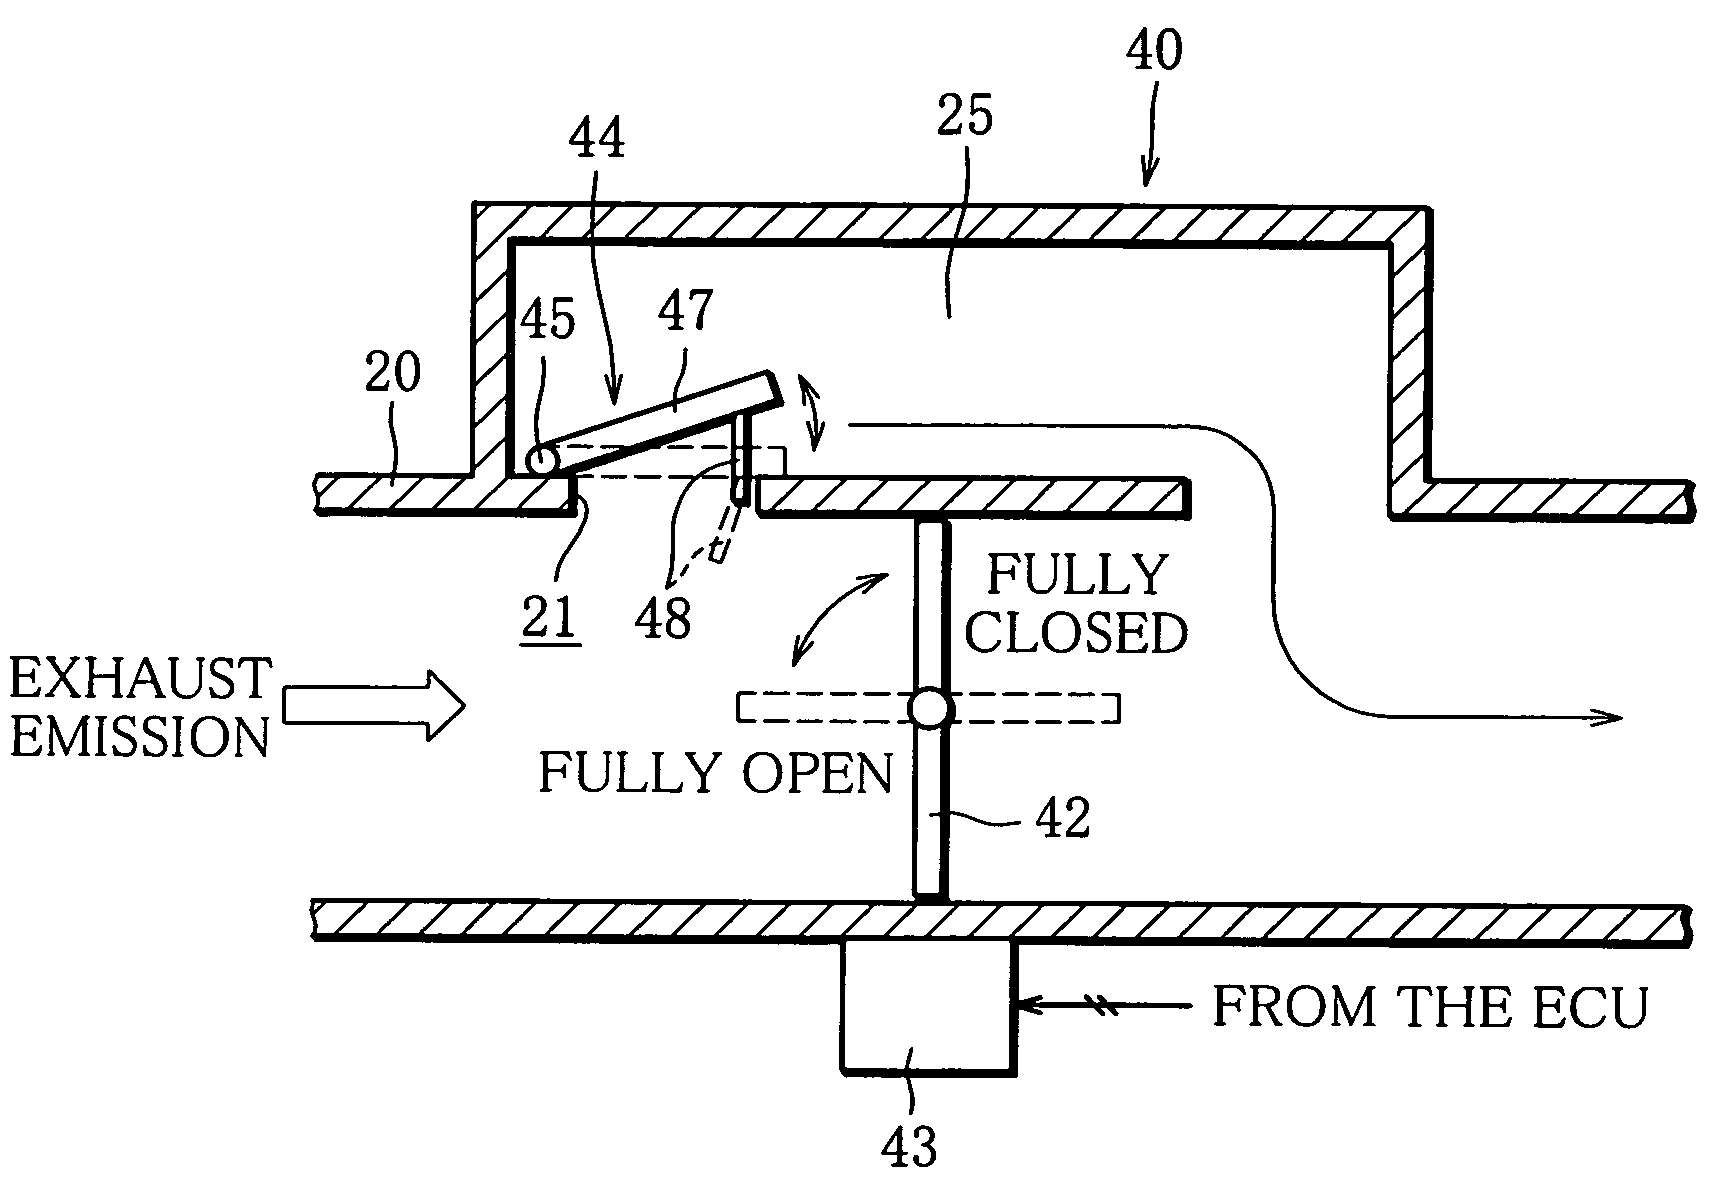 Exhaust pressure-raising device for an internal combustion engine